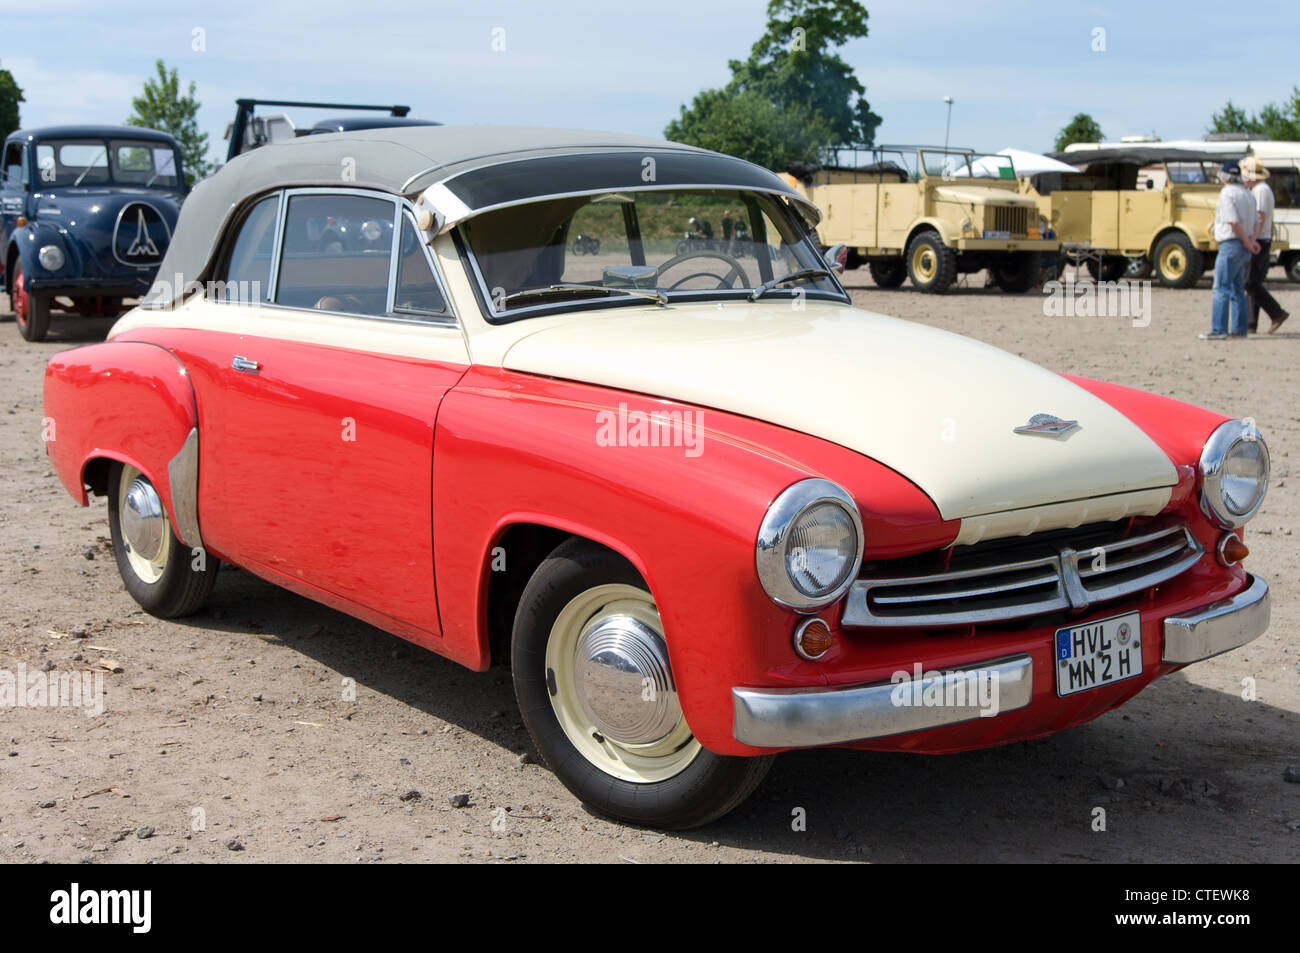 Page 2 - Wartburg Auto High Resolution Stock Photography and Images - Alamy